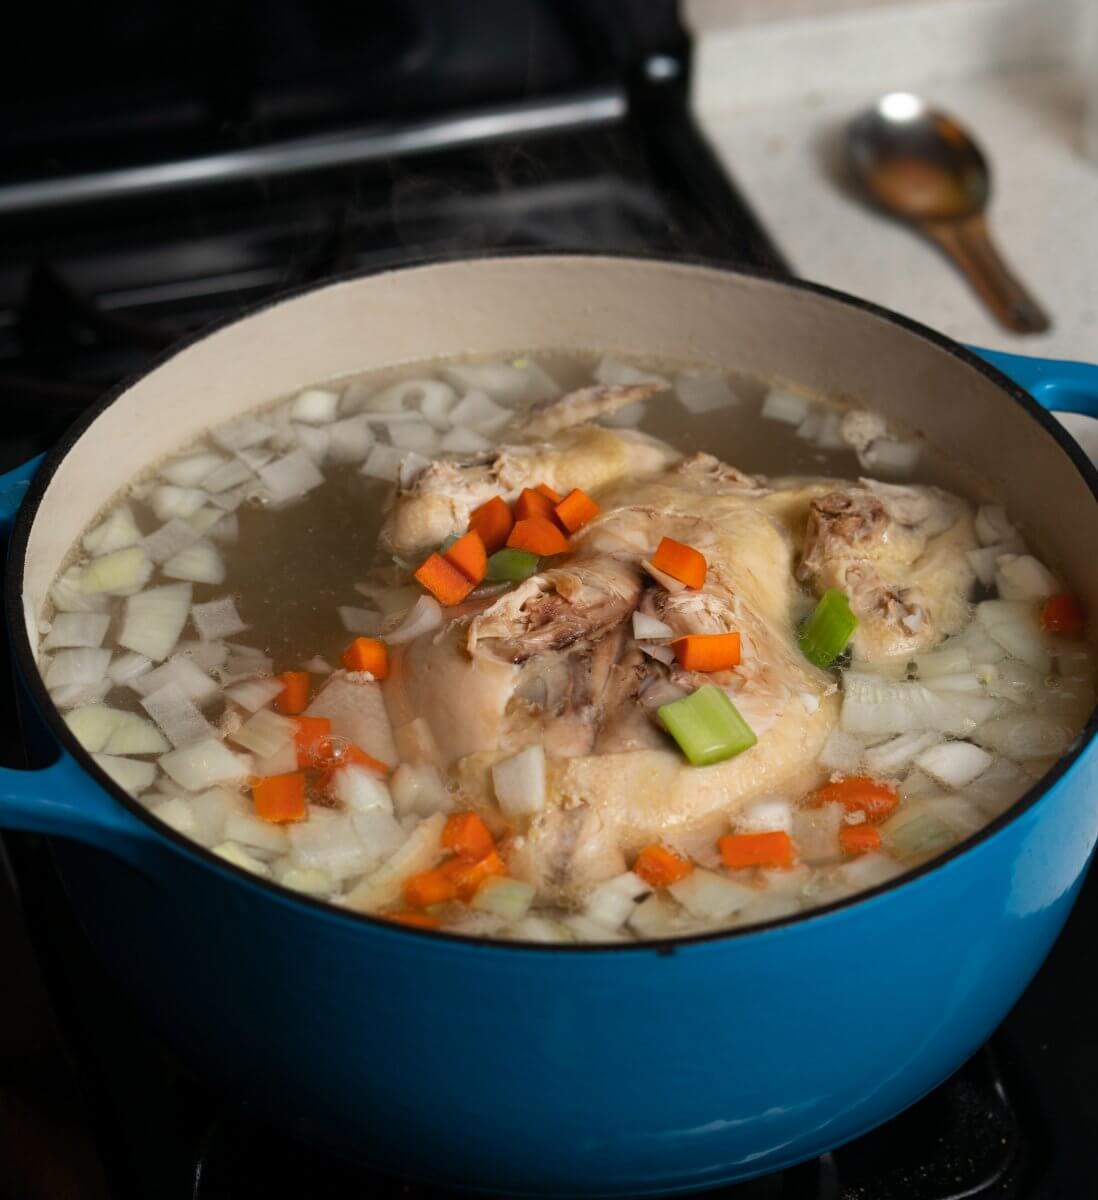 Chicken stock as a substitute for fish stock